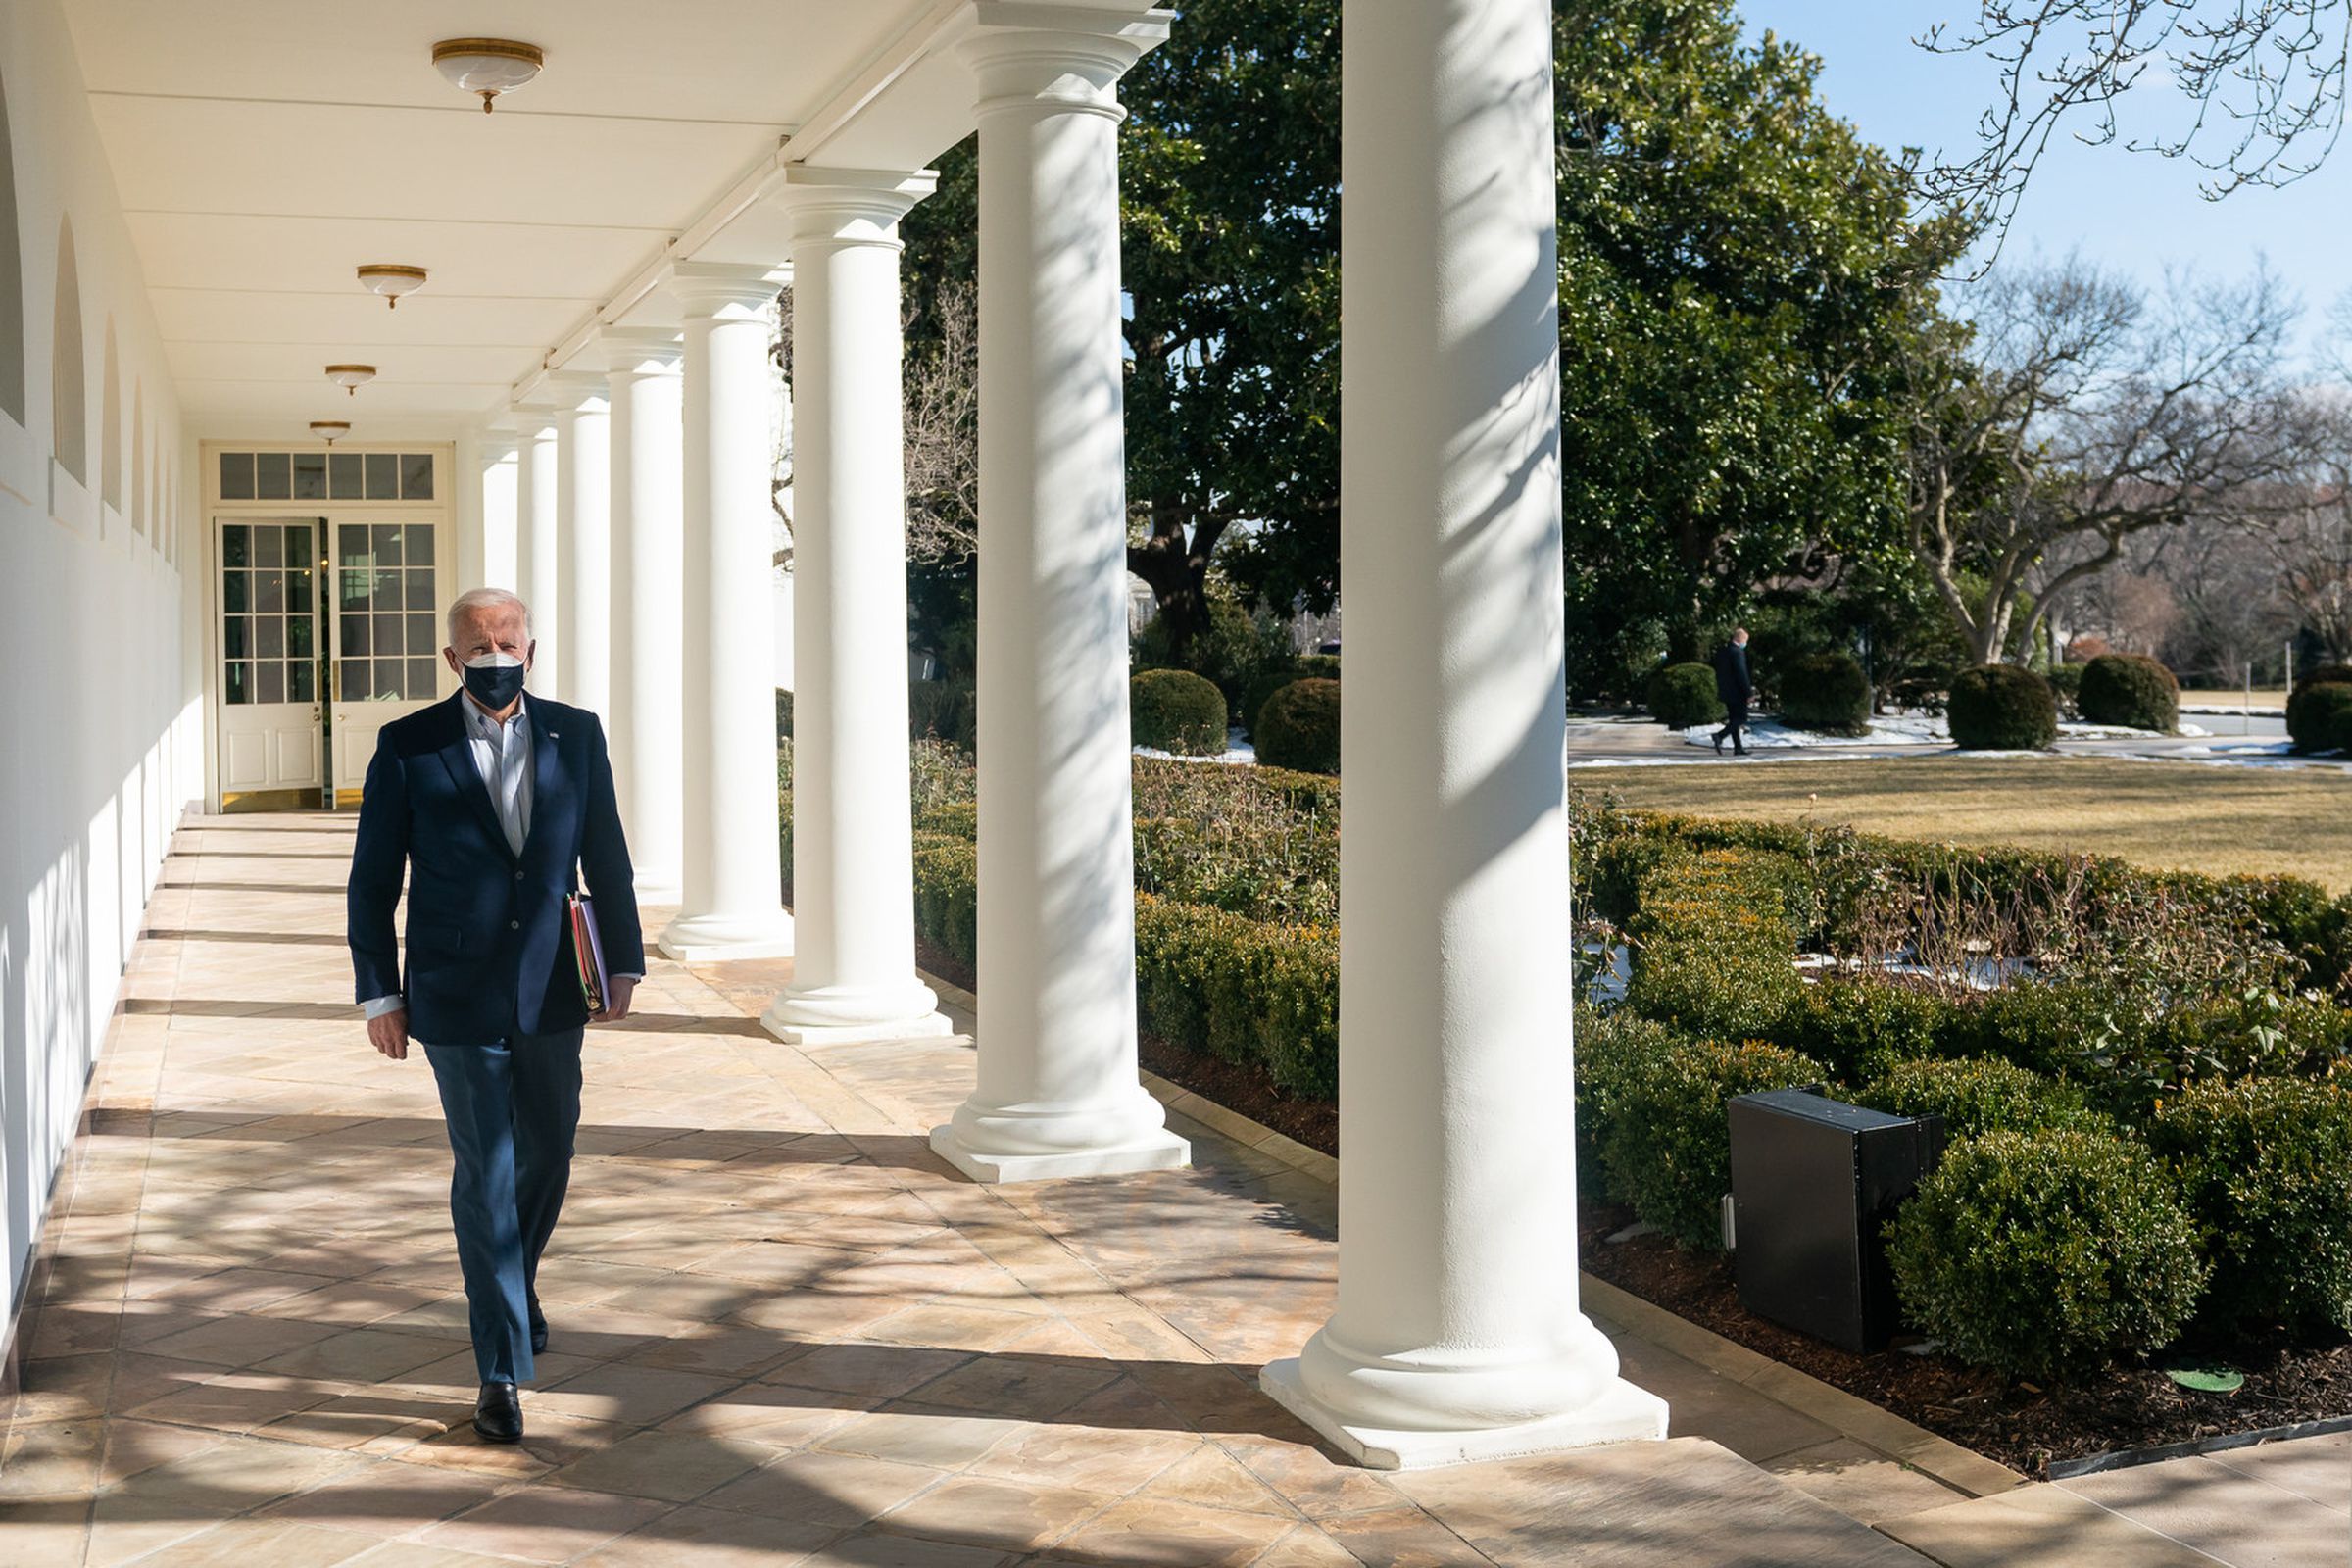 President Joe Biden arrives to the Oval Office Saturday, Feb. 20, 2021, along the West Wing Colonnade of the White House. (Official White House Photo by Adam Schultz)